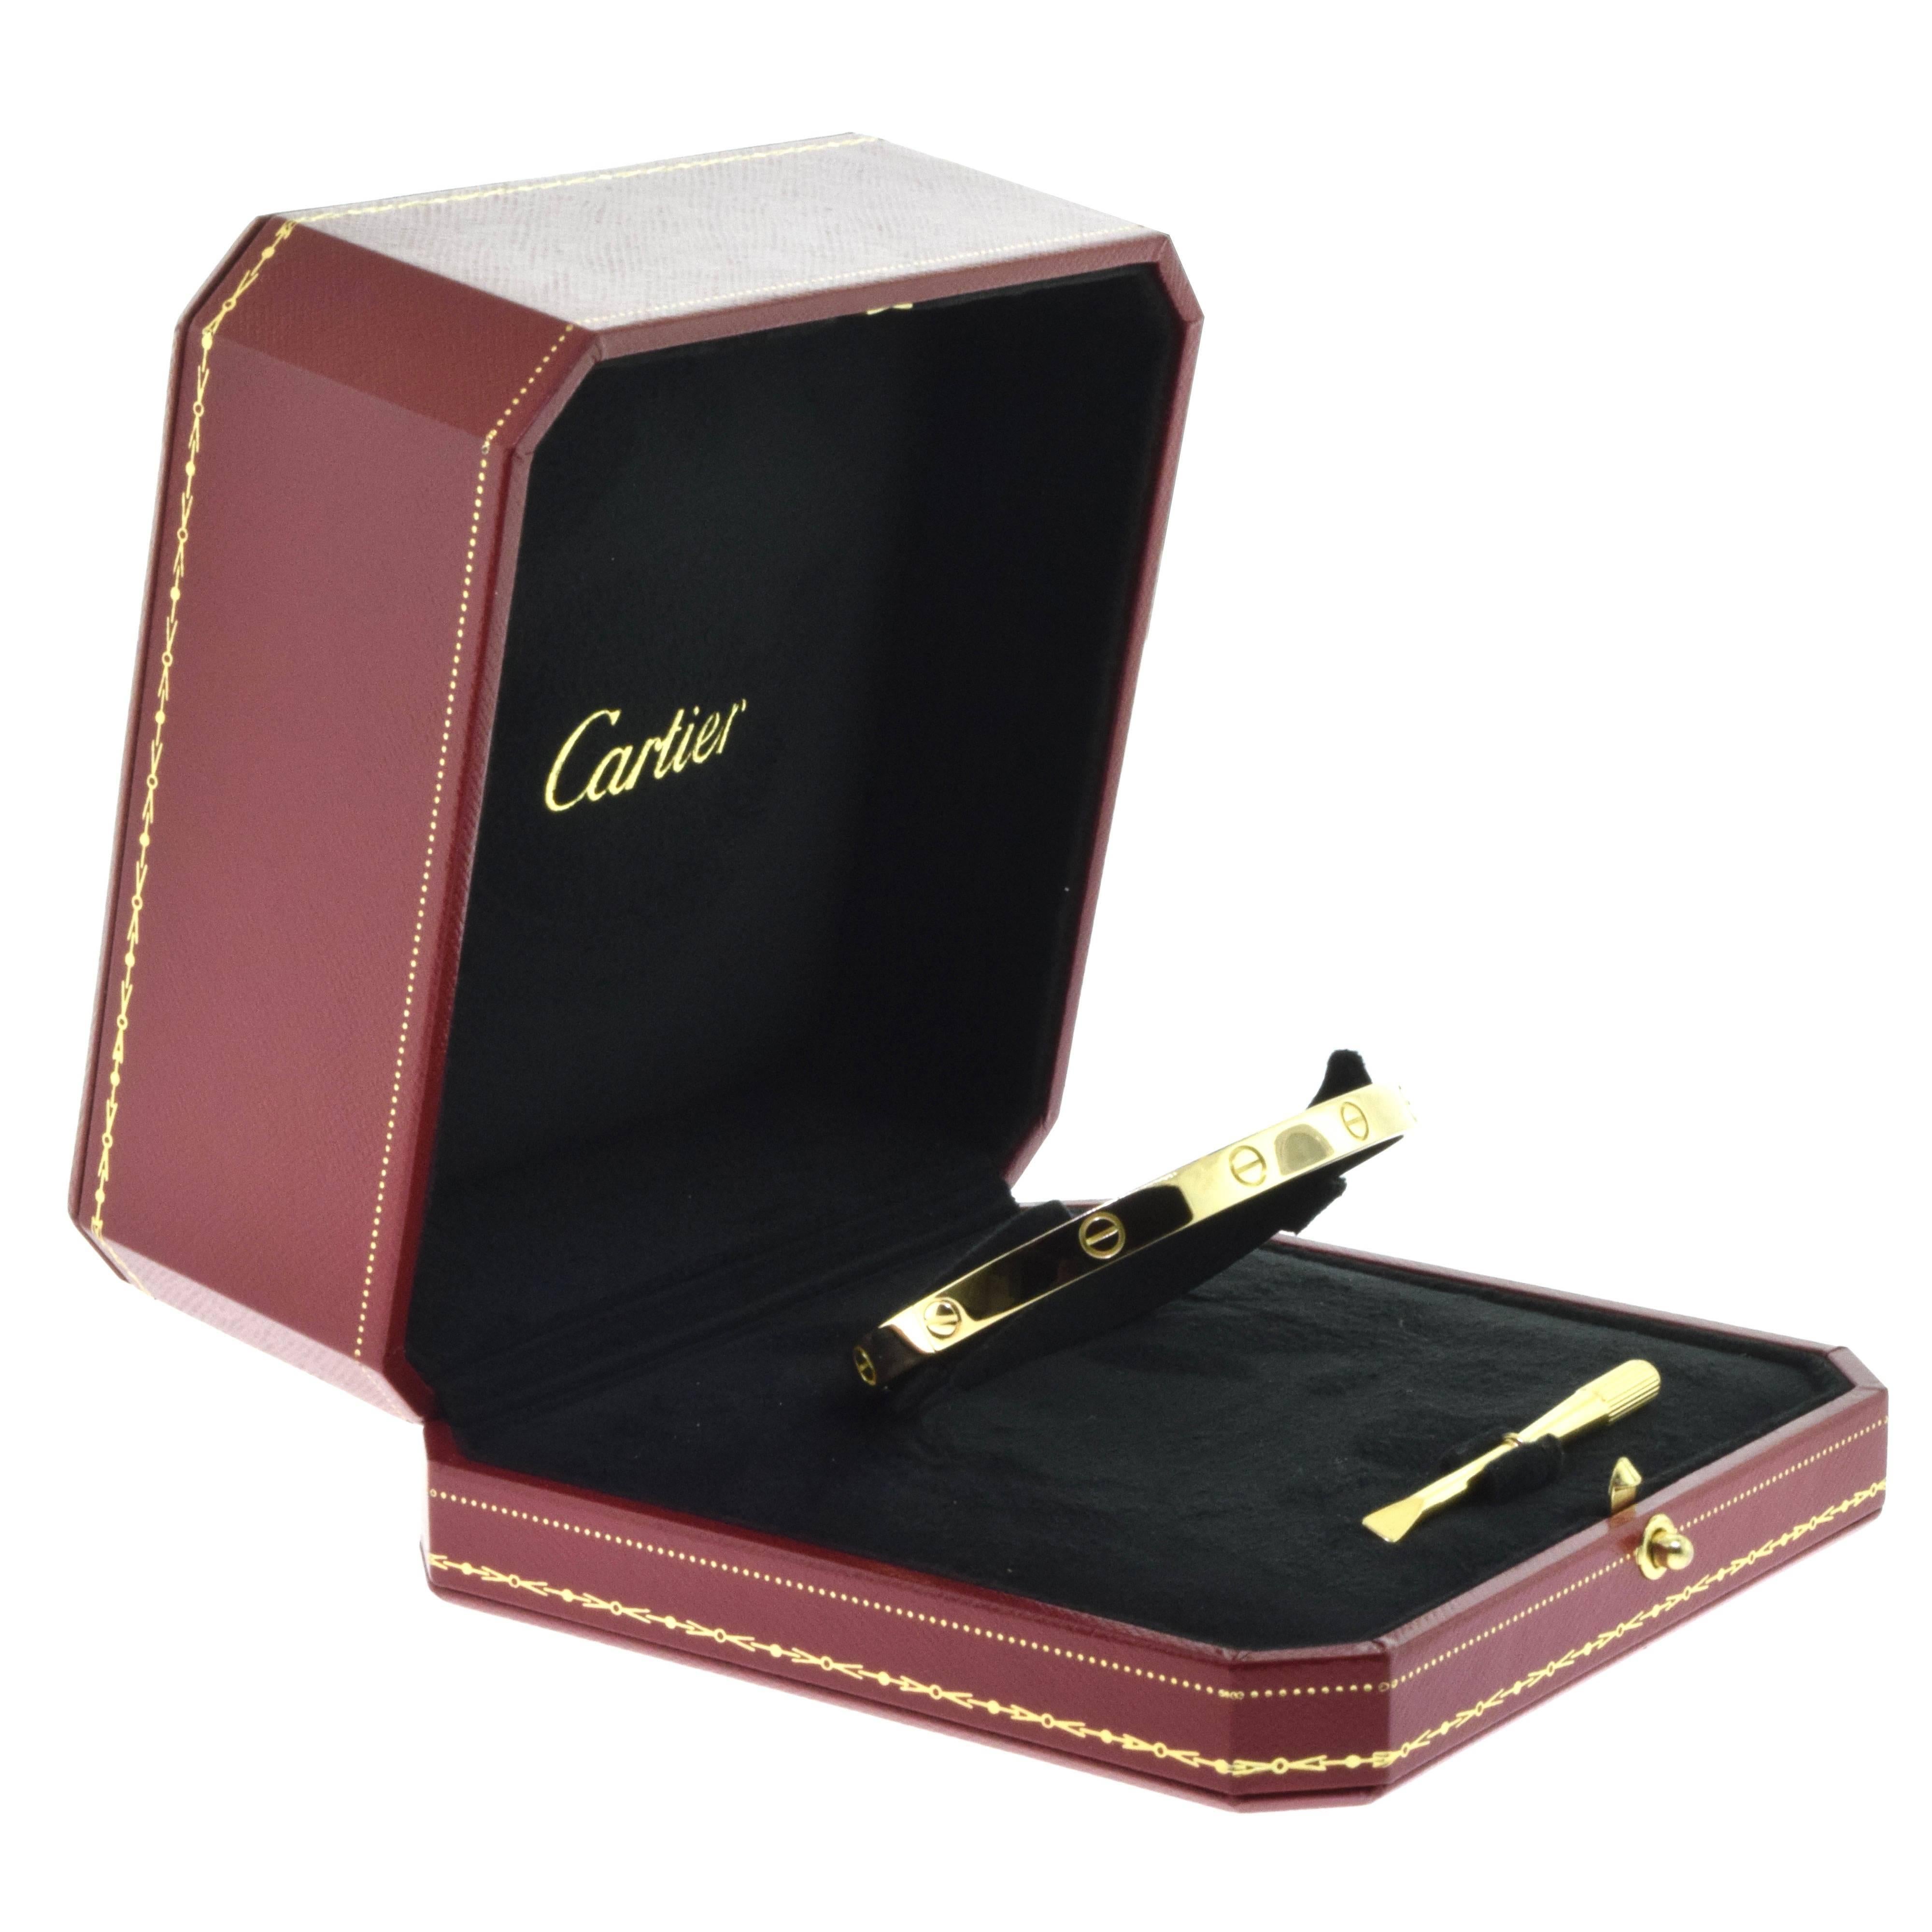 From Cartier's LOVE Collection:
A gorgeous 18 Karat Yellow Gold LOVE Bangle in Size 21 (21 cm). 

Total Item Weight (g): 34.1
Hallmark: Cartier 750 Serial No.
Screw System: Old Screw
Retail: $6,300.00 (excl. sales tax)
Comes with Box and Screwdriver